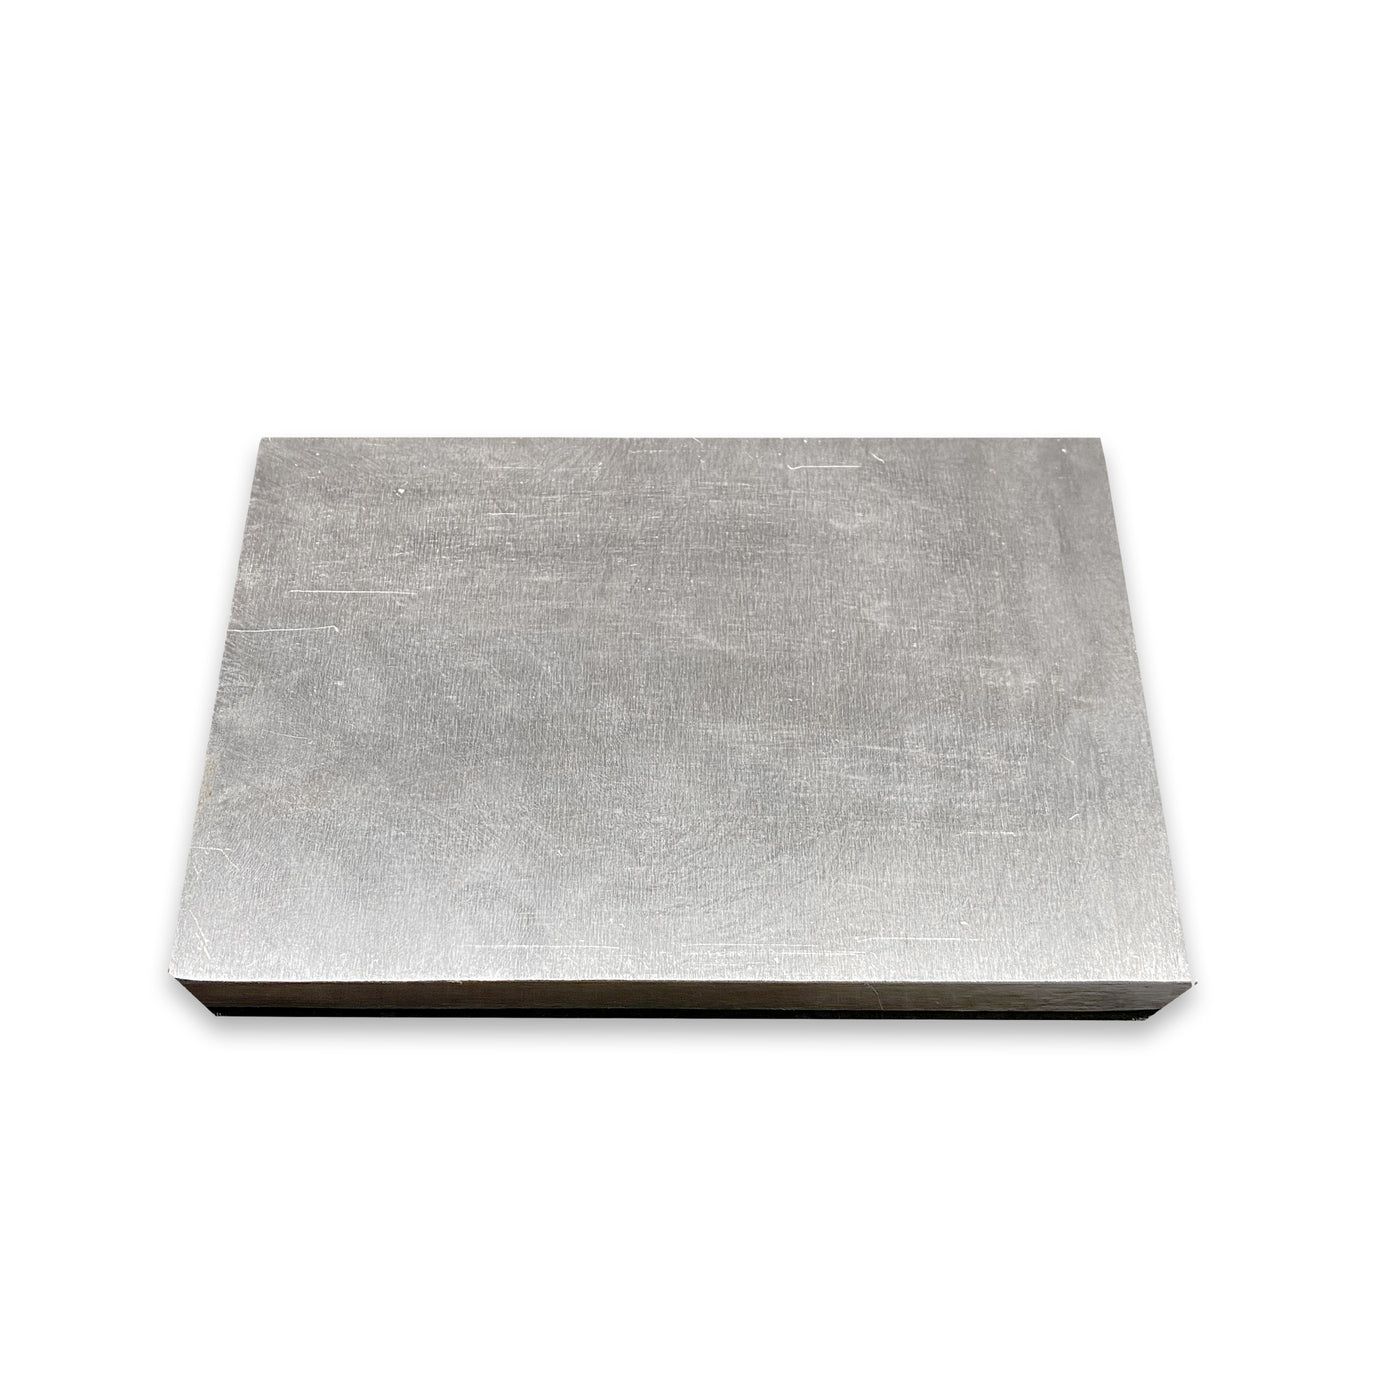 Steel Bench Block, 6 x 4 , 1/2 thick – Beaducation